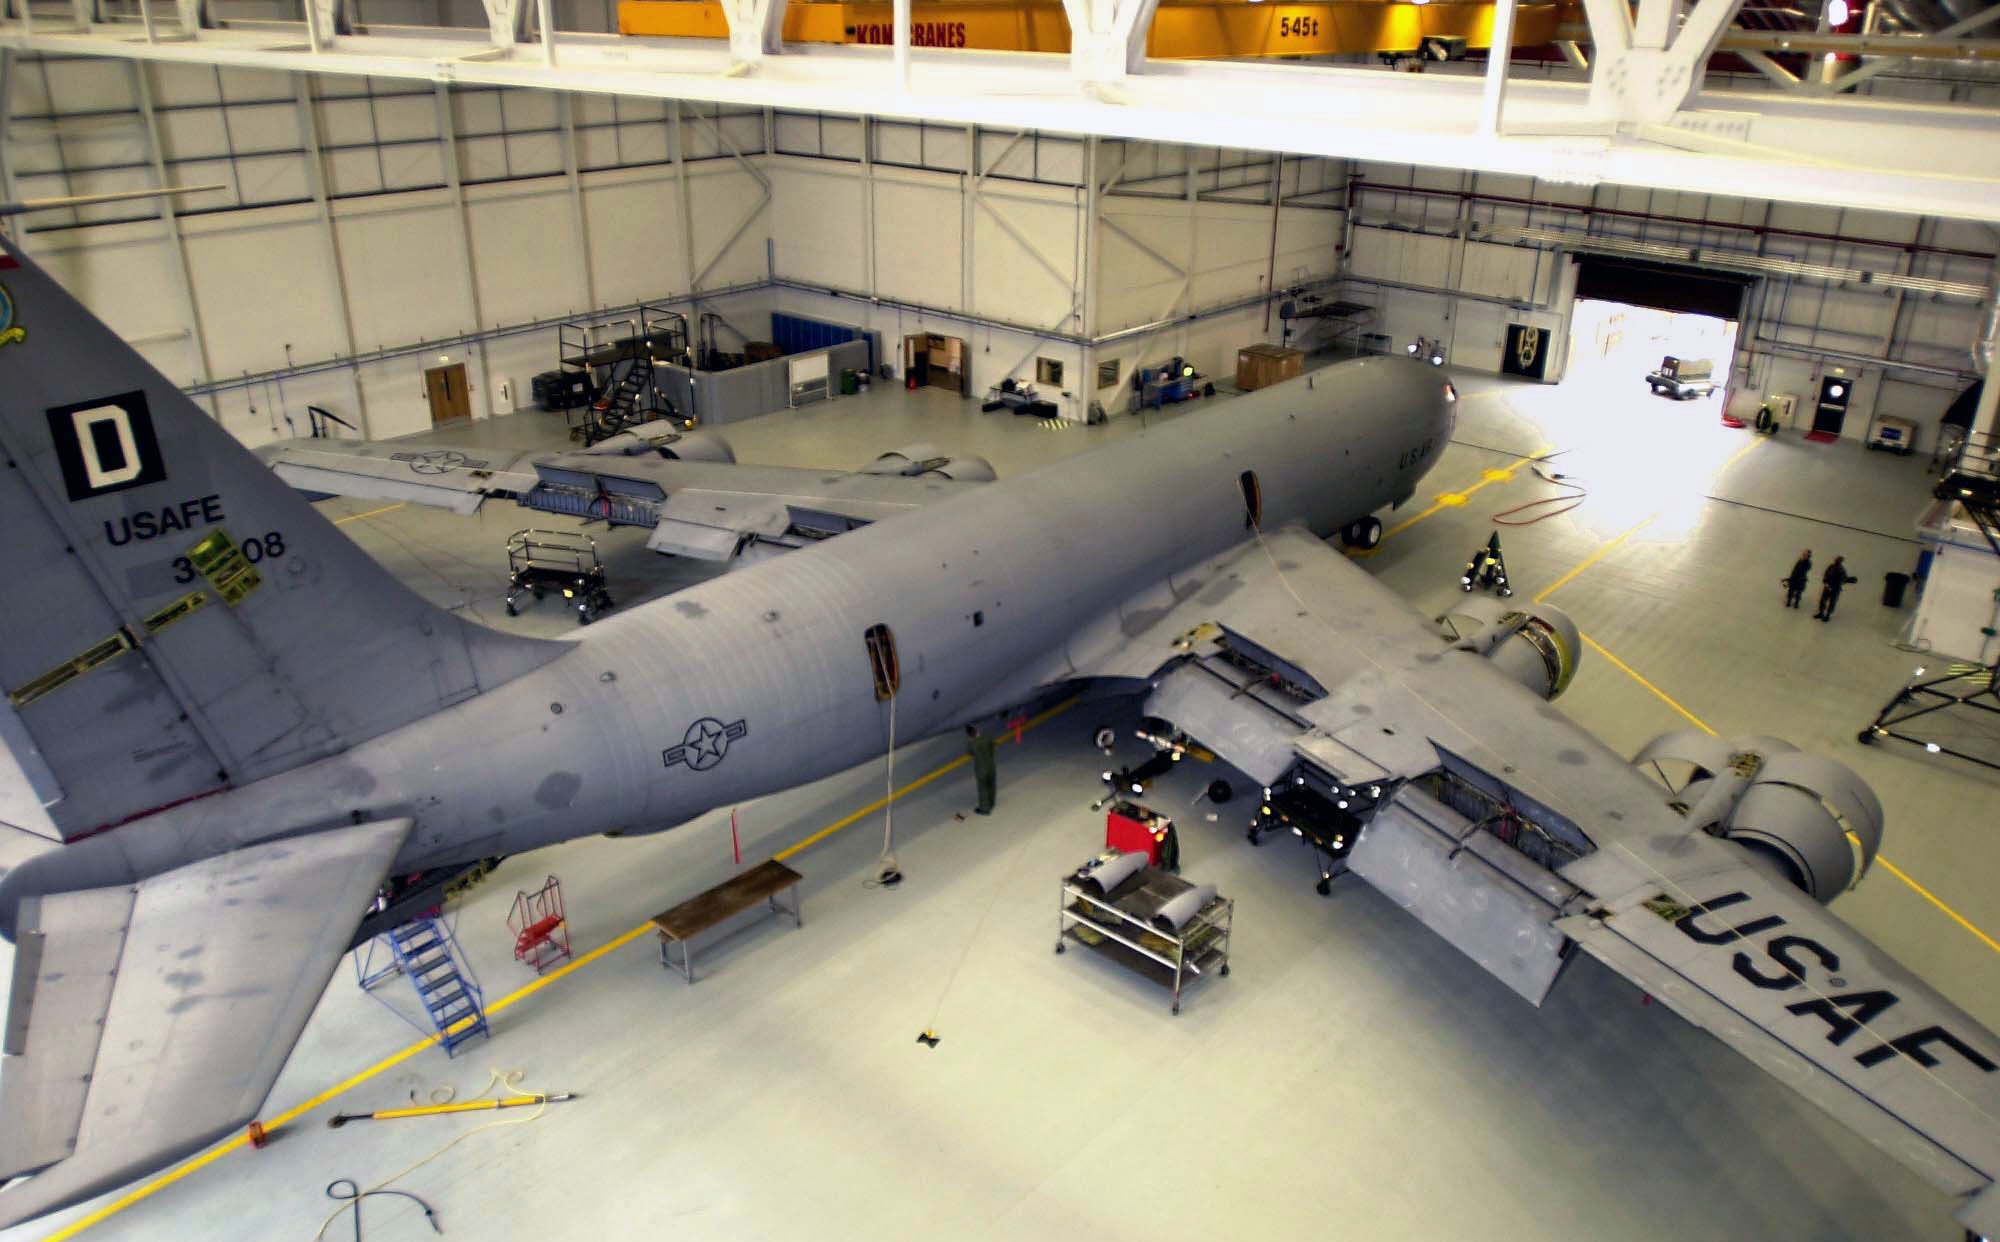 A KC-135 Stratotanker undergoes an isochronal inspection at Royal Air Force Mildenhall, England. The inspection begins with all access panels being removed to check flight controls. Air Force officials announced the selection of the Northrop Grumman company to replace the aging KC-135 and to produce up to 179 of the new air refuelers. (U.S. Air Force photo/Airman 1st Class Franklin J. Perkins)